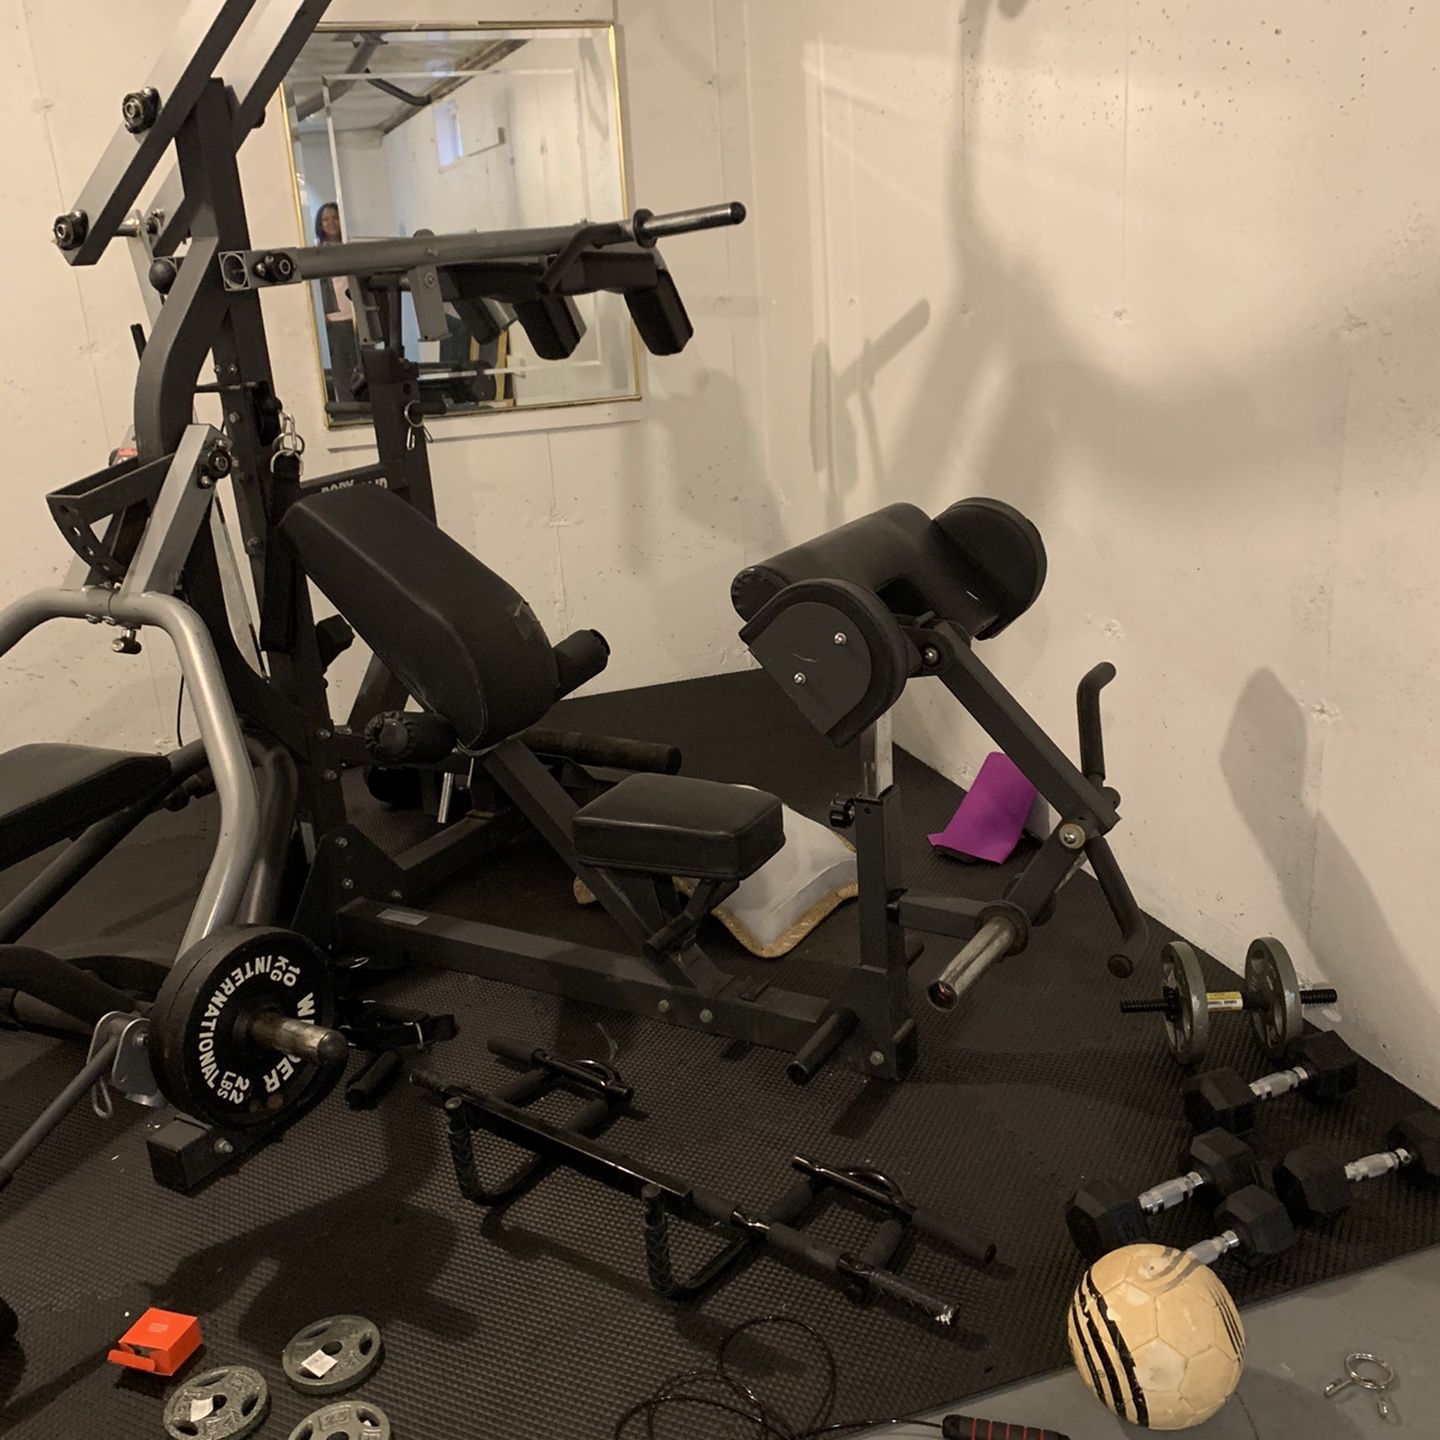 Gym Equipment Full Body Workout Sale Or Trade For A 24’  Boat Trailer